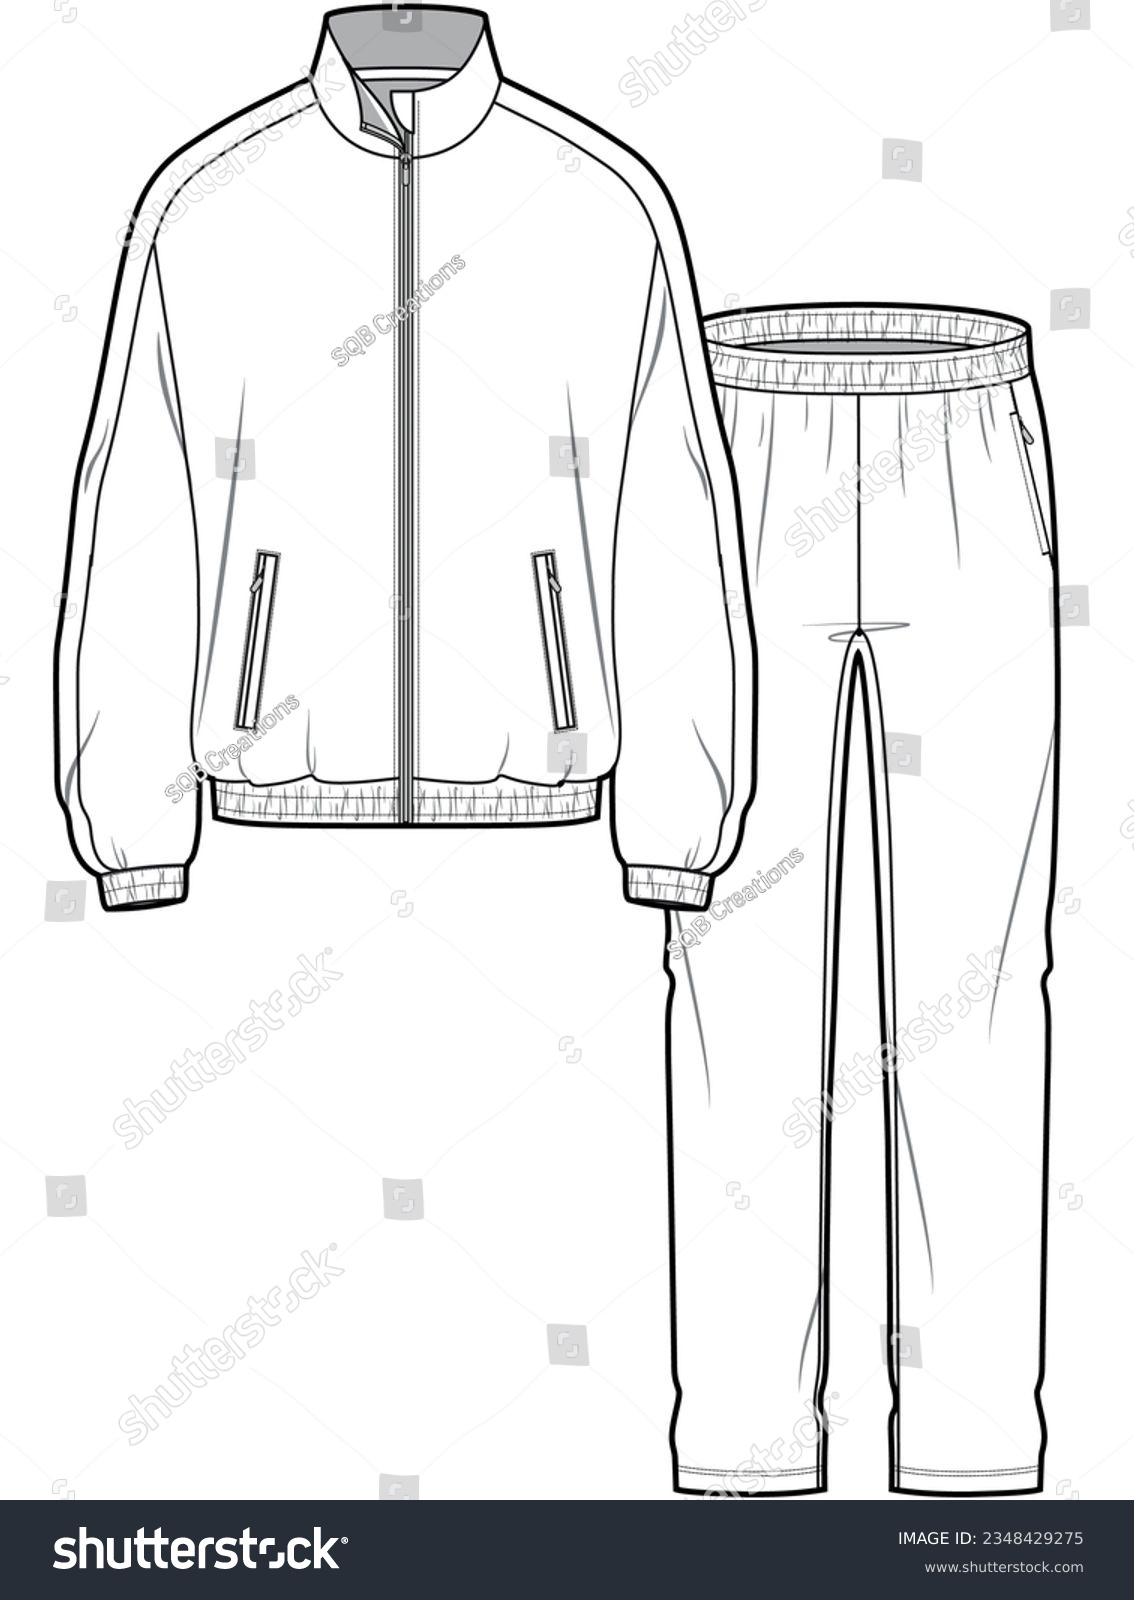 SVG of training tracksuit full zip long sleeve jacket and pants running jogging athletic sports wear set flat sketch vector illustration technical cad drawing template svg